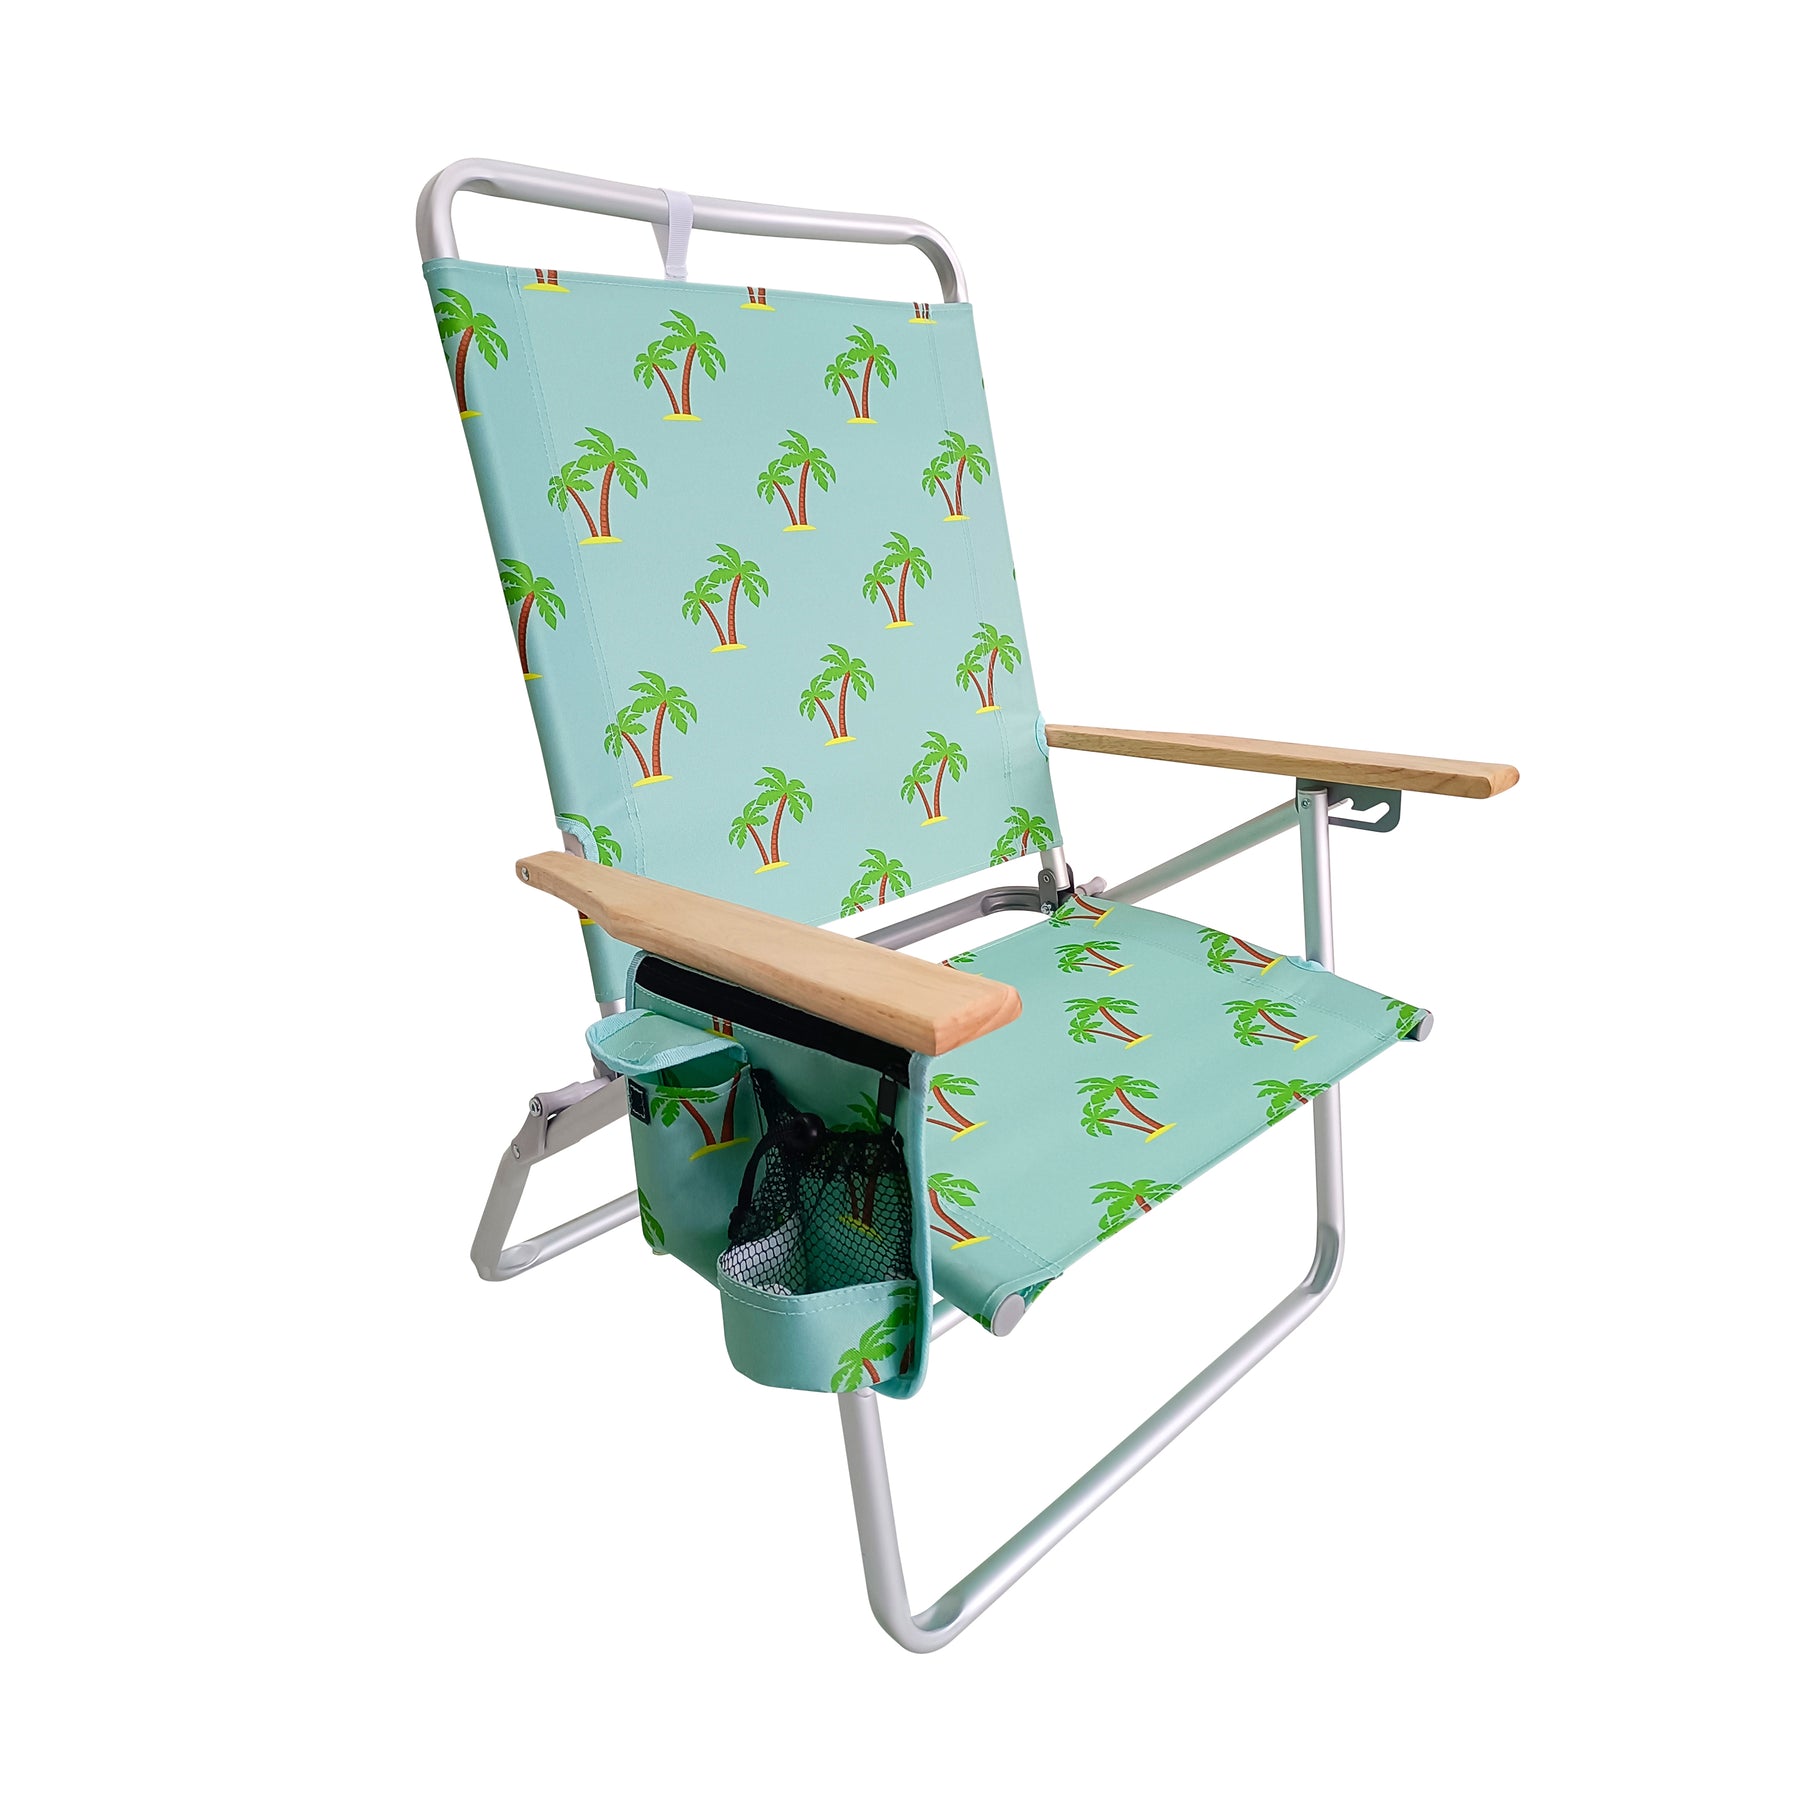 Bliss Hammocks Foldable Beach Chair with Side Pocket, 3 Reclining Positions, Storage Pouch, Phone Holder, Cup Holder, and Shoulder Strap. Palm Tree variation is a light blue color with a palm tree pattern.